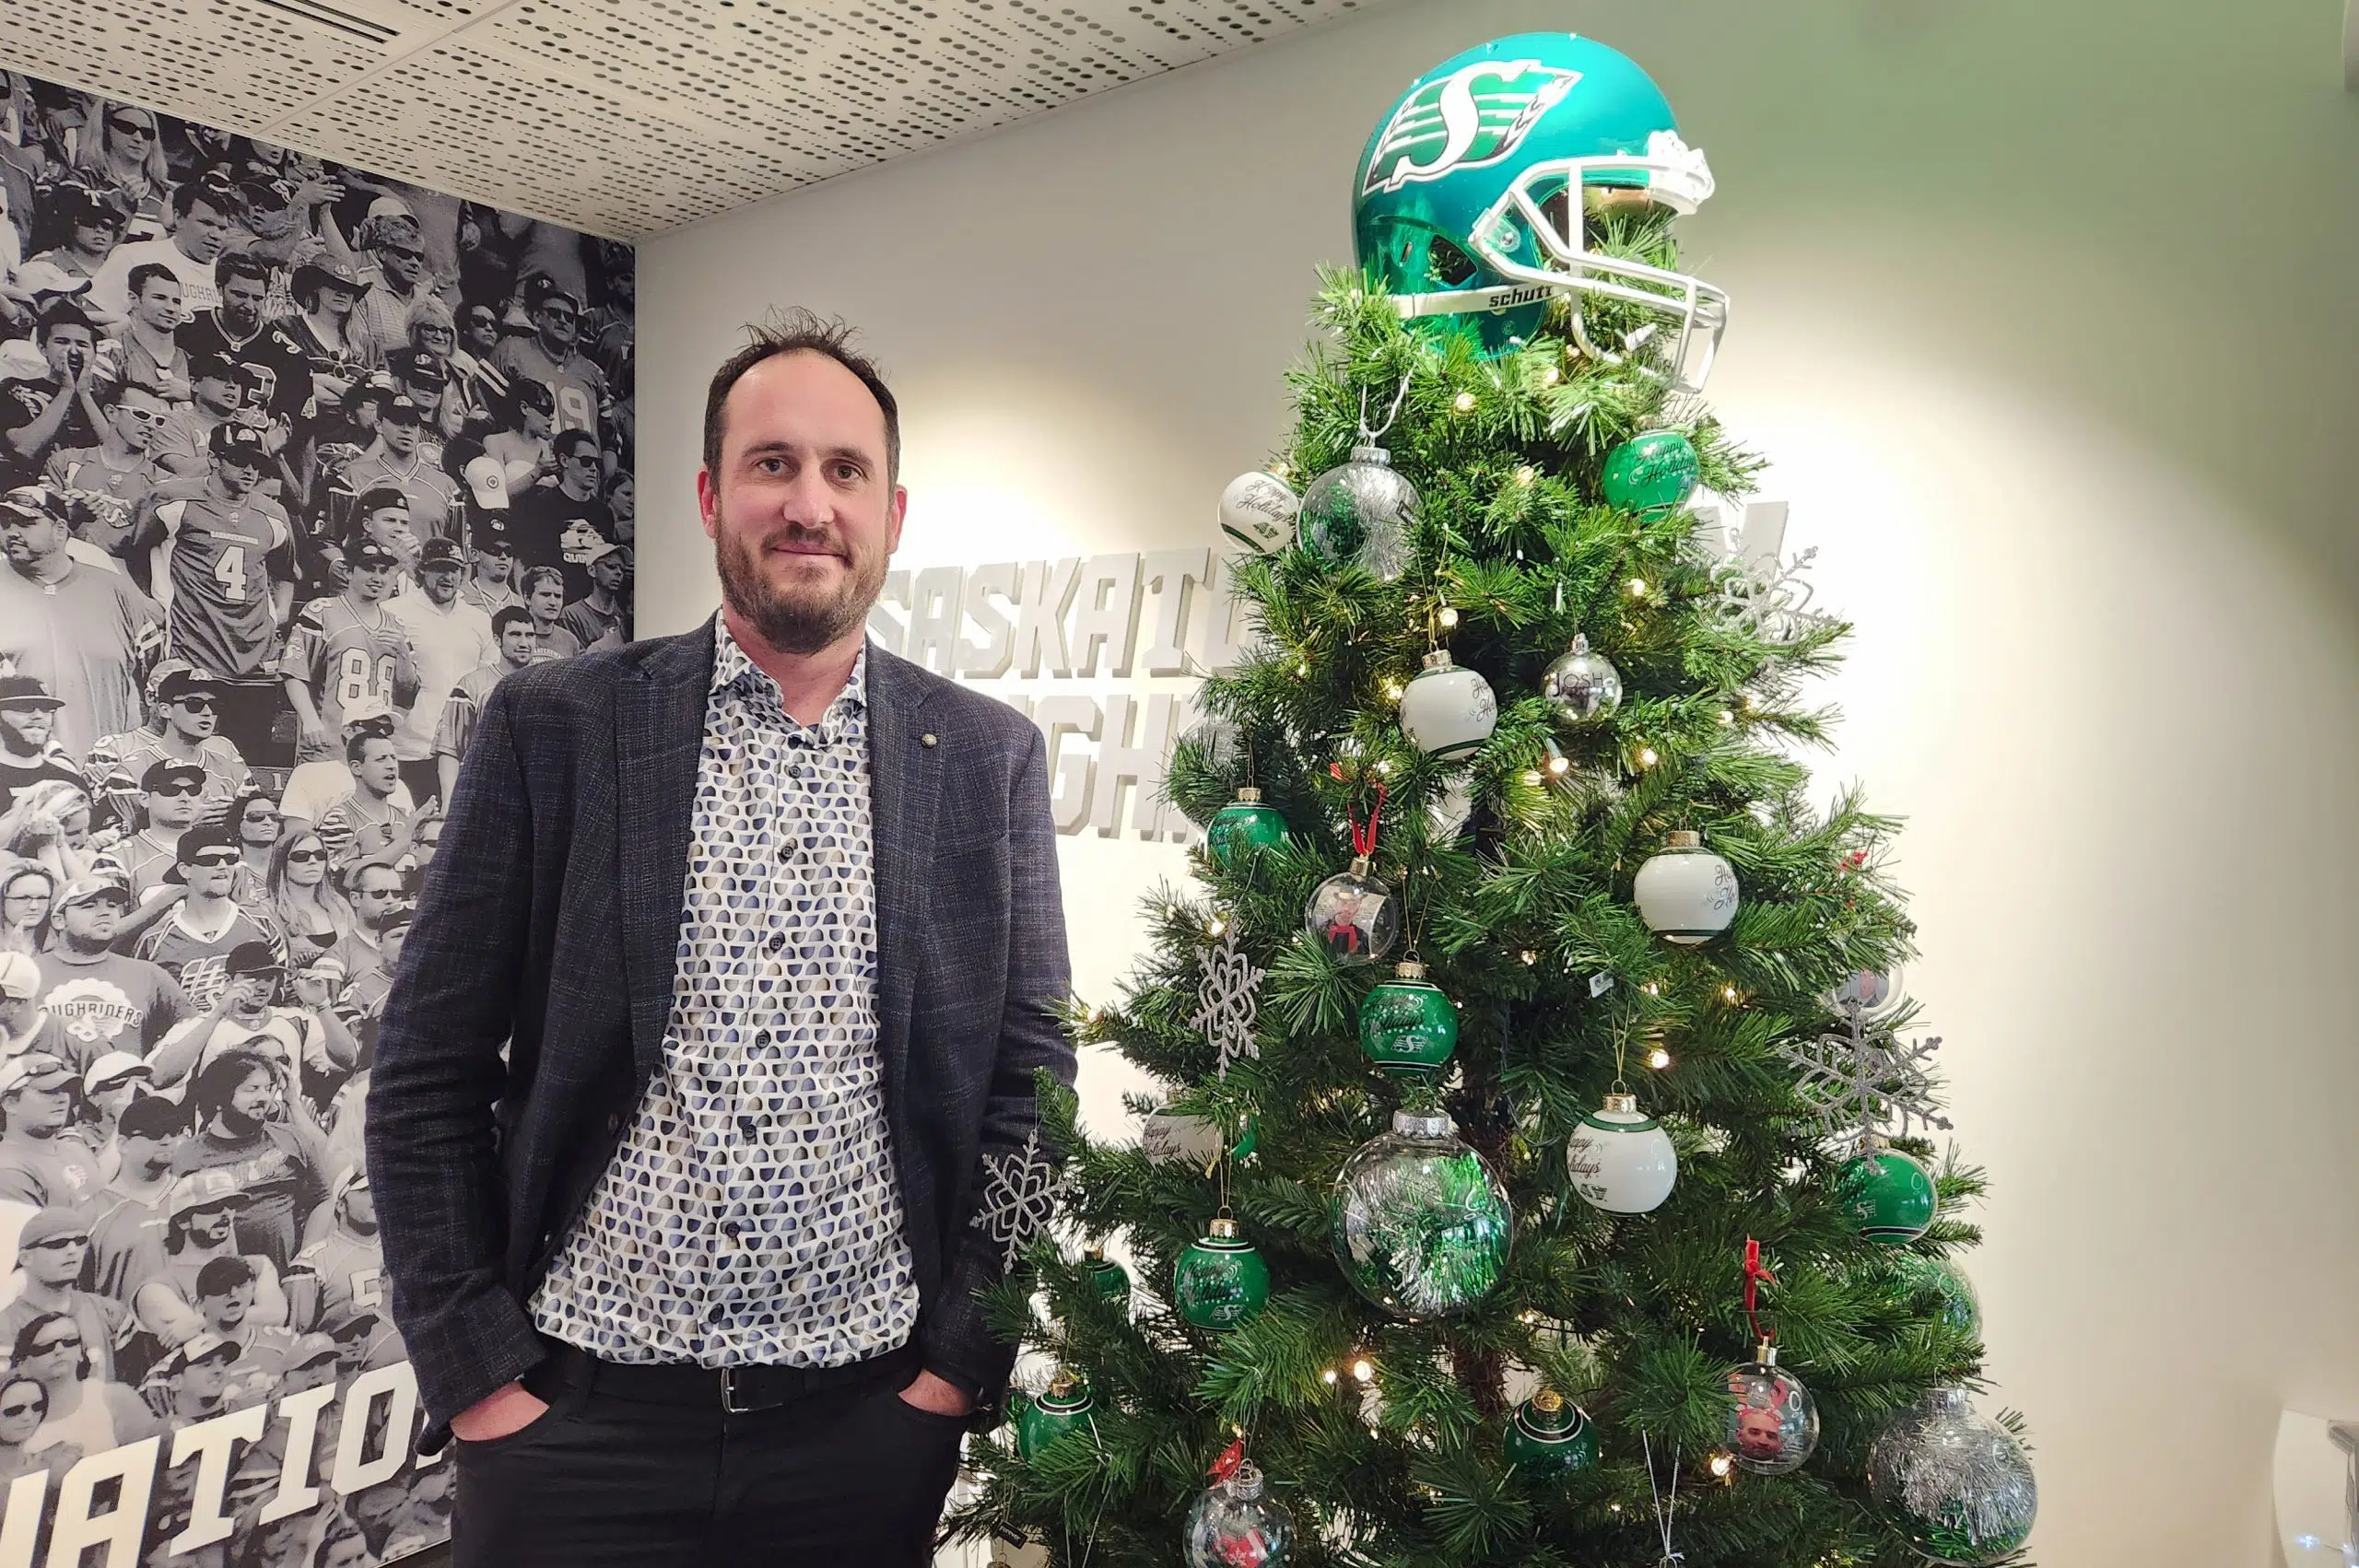 Riders' Reynolds saw challenging 2022, but believes in a bounce back in 2023